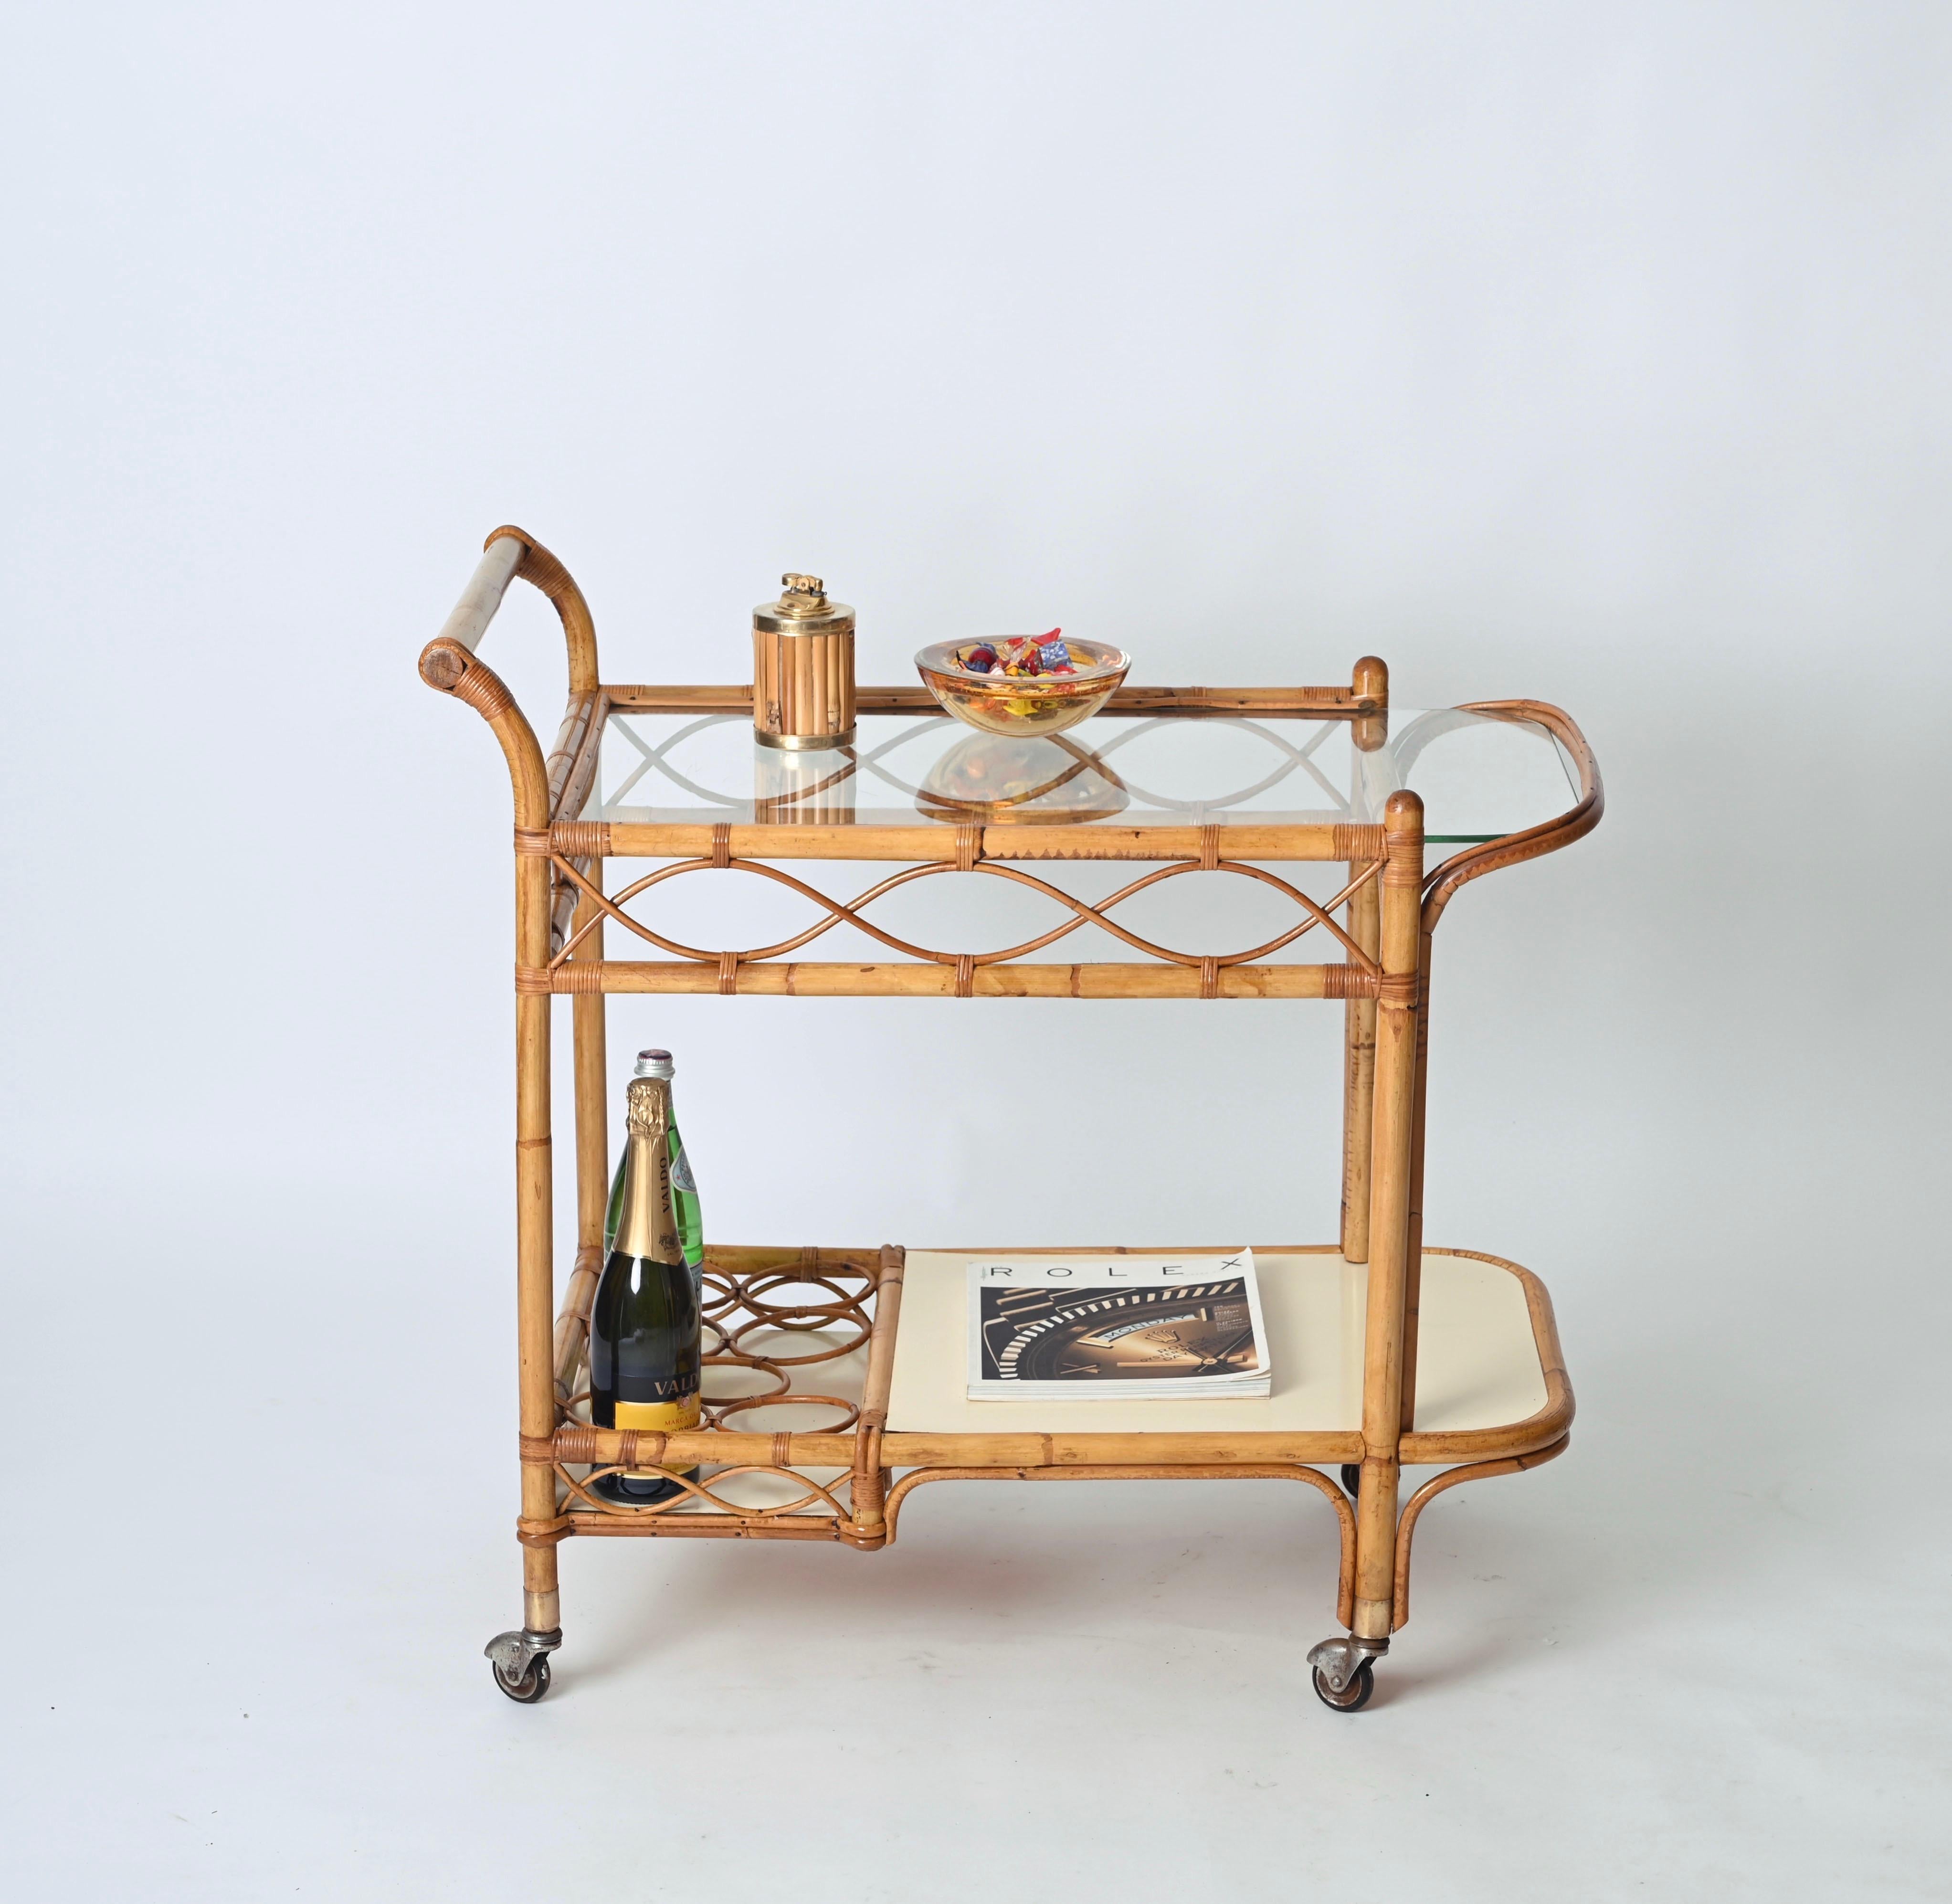 Hand-Woven Midcentury Italian Bamboo, Rattan and Formica Bar Serving Cart, Italy 1960s For Sale